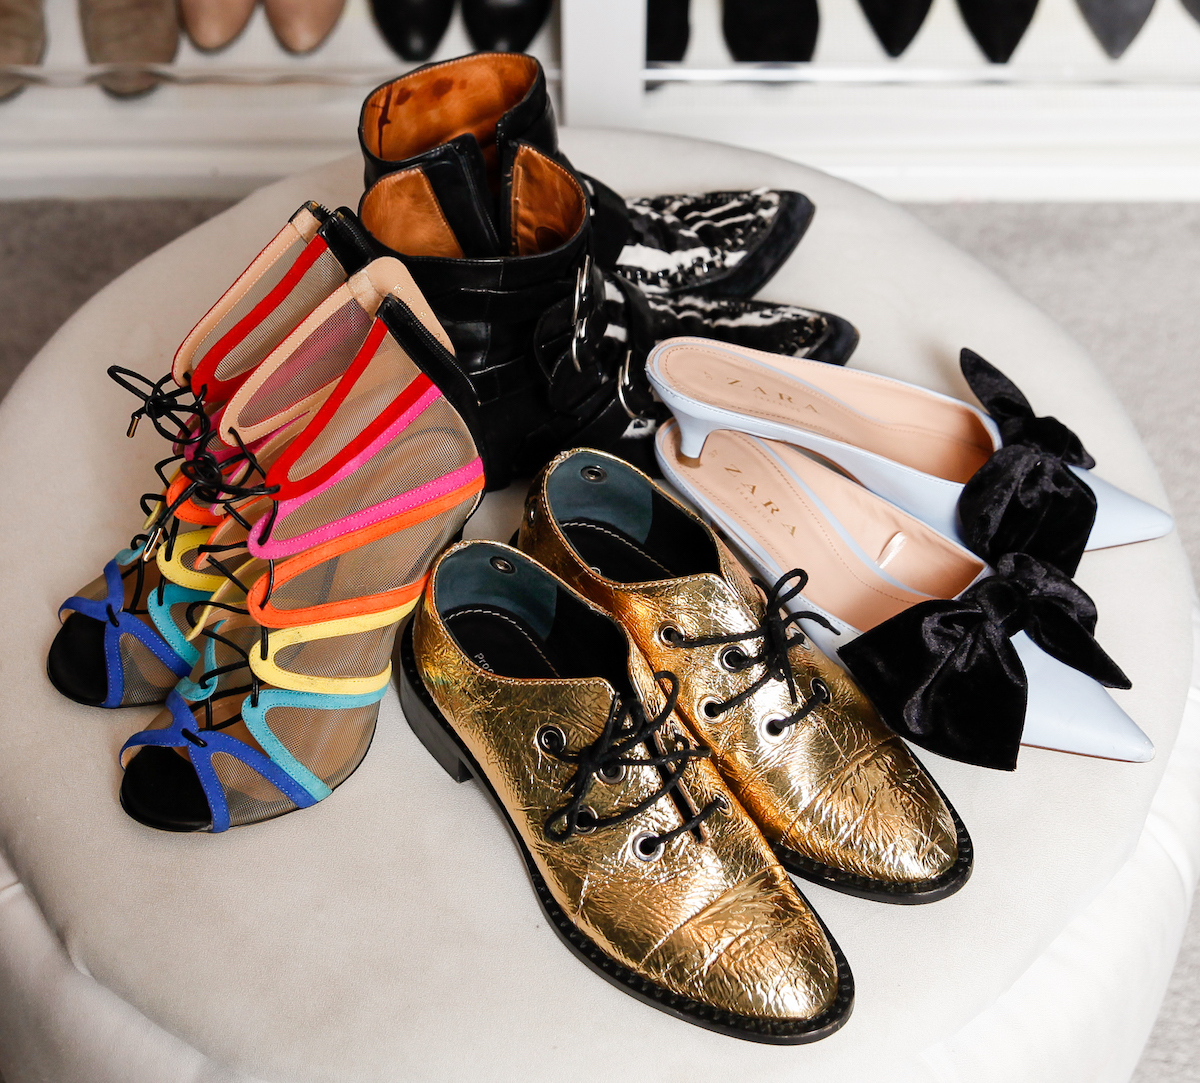 "Every Shoe A Woman Should Own + Summer Styles